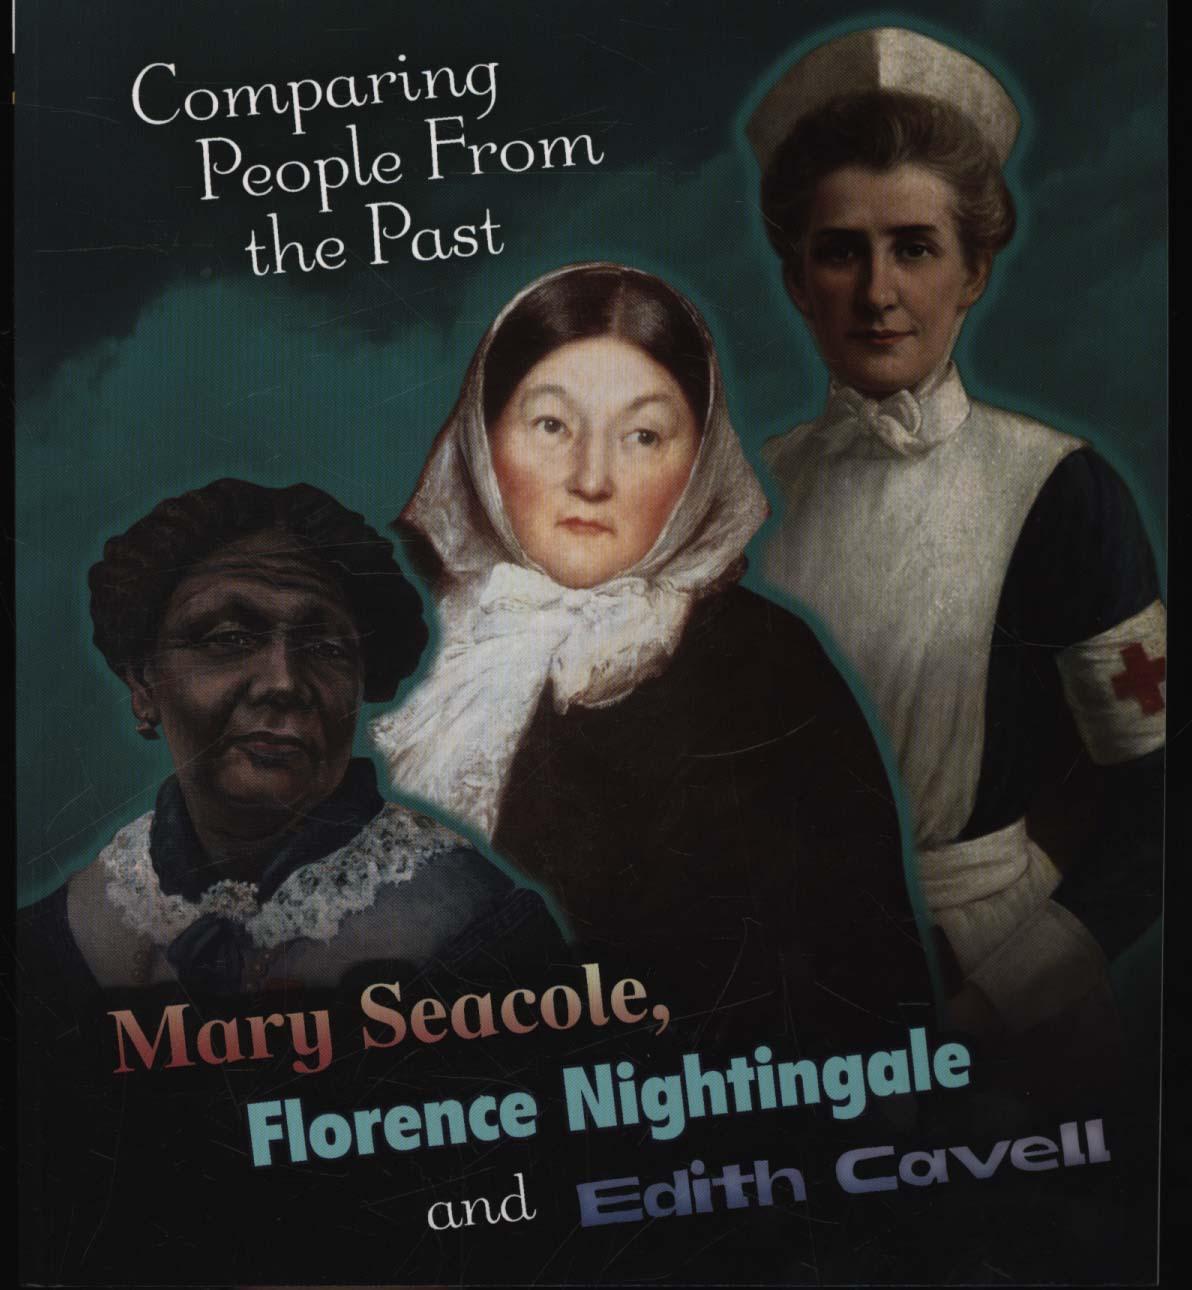 Mary Seacole, Florence Nightingale and Edith Cavell